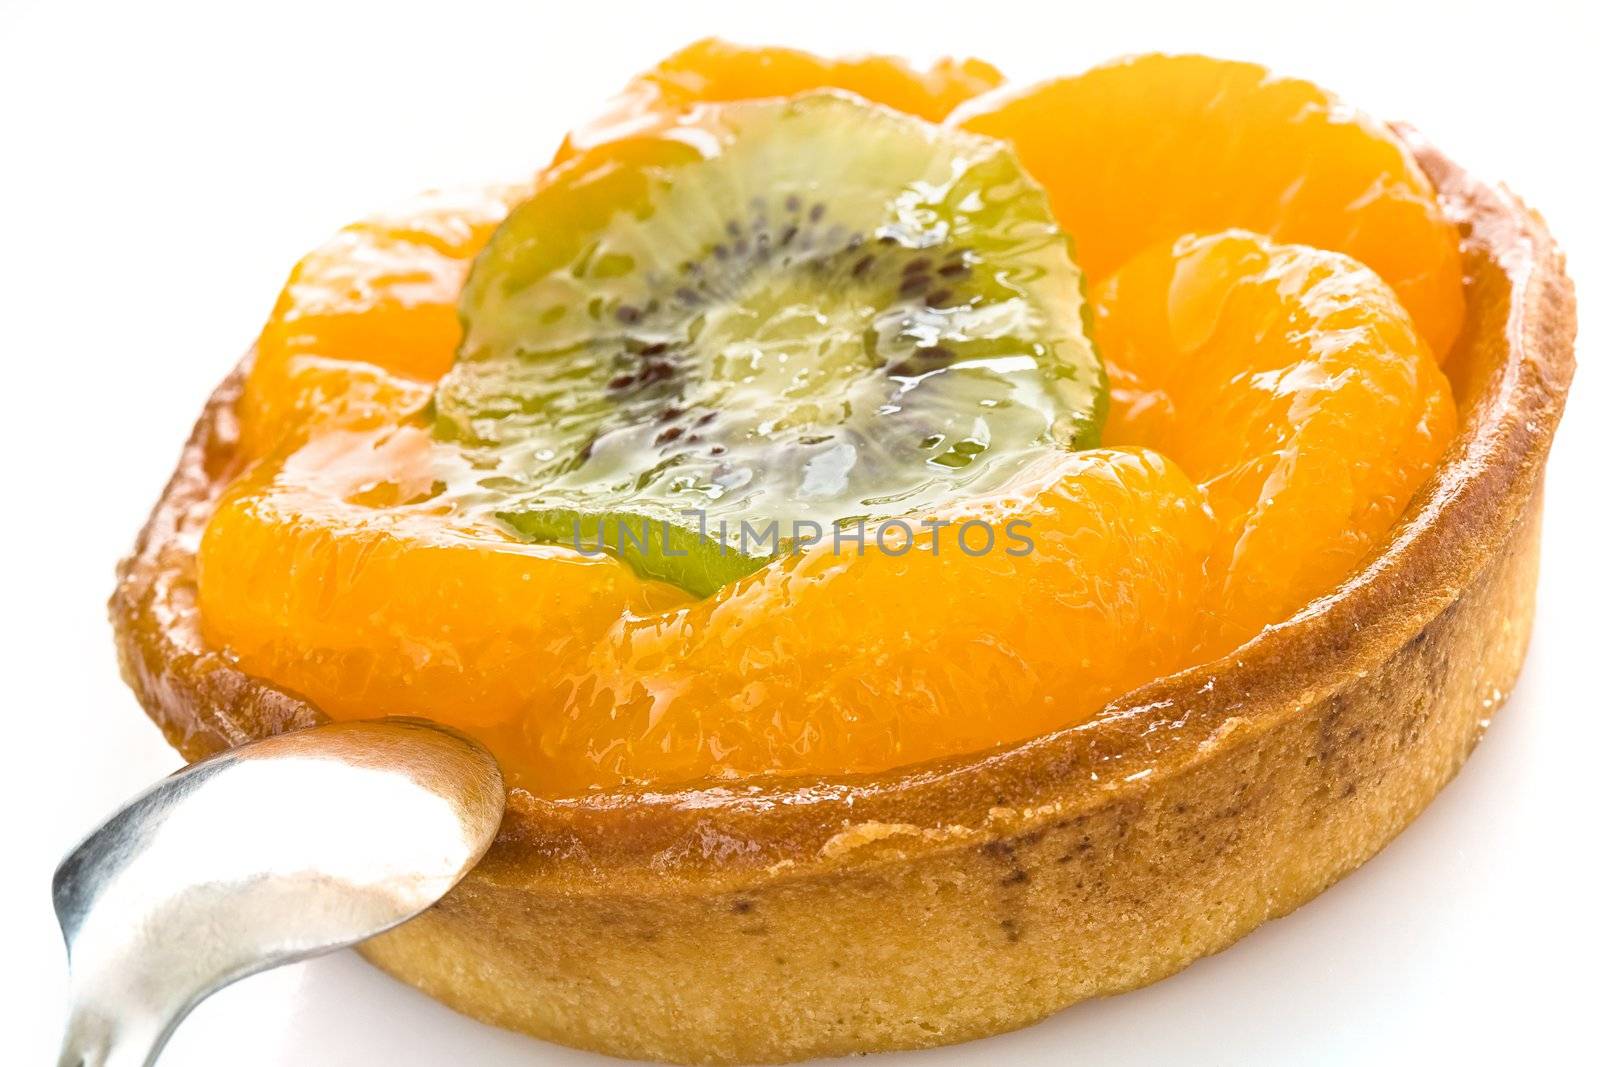 Round cake with segments of a tangerine and a circle of kiwi close up on a white background with a spoon
